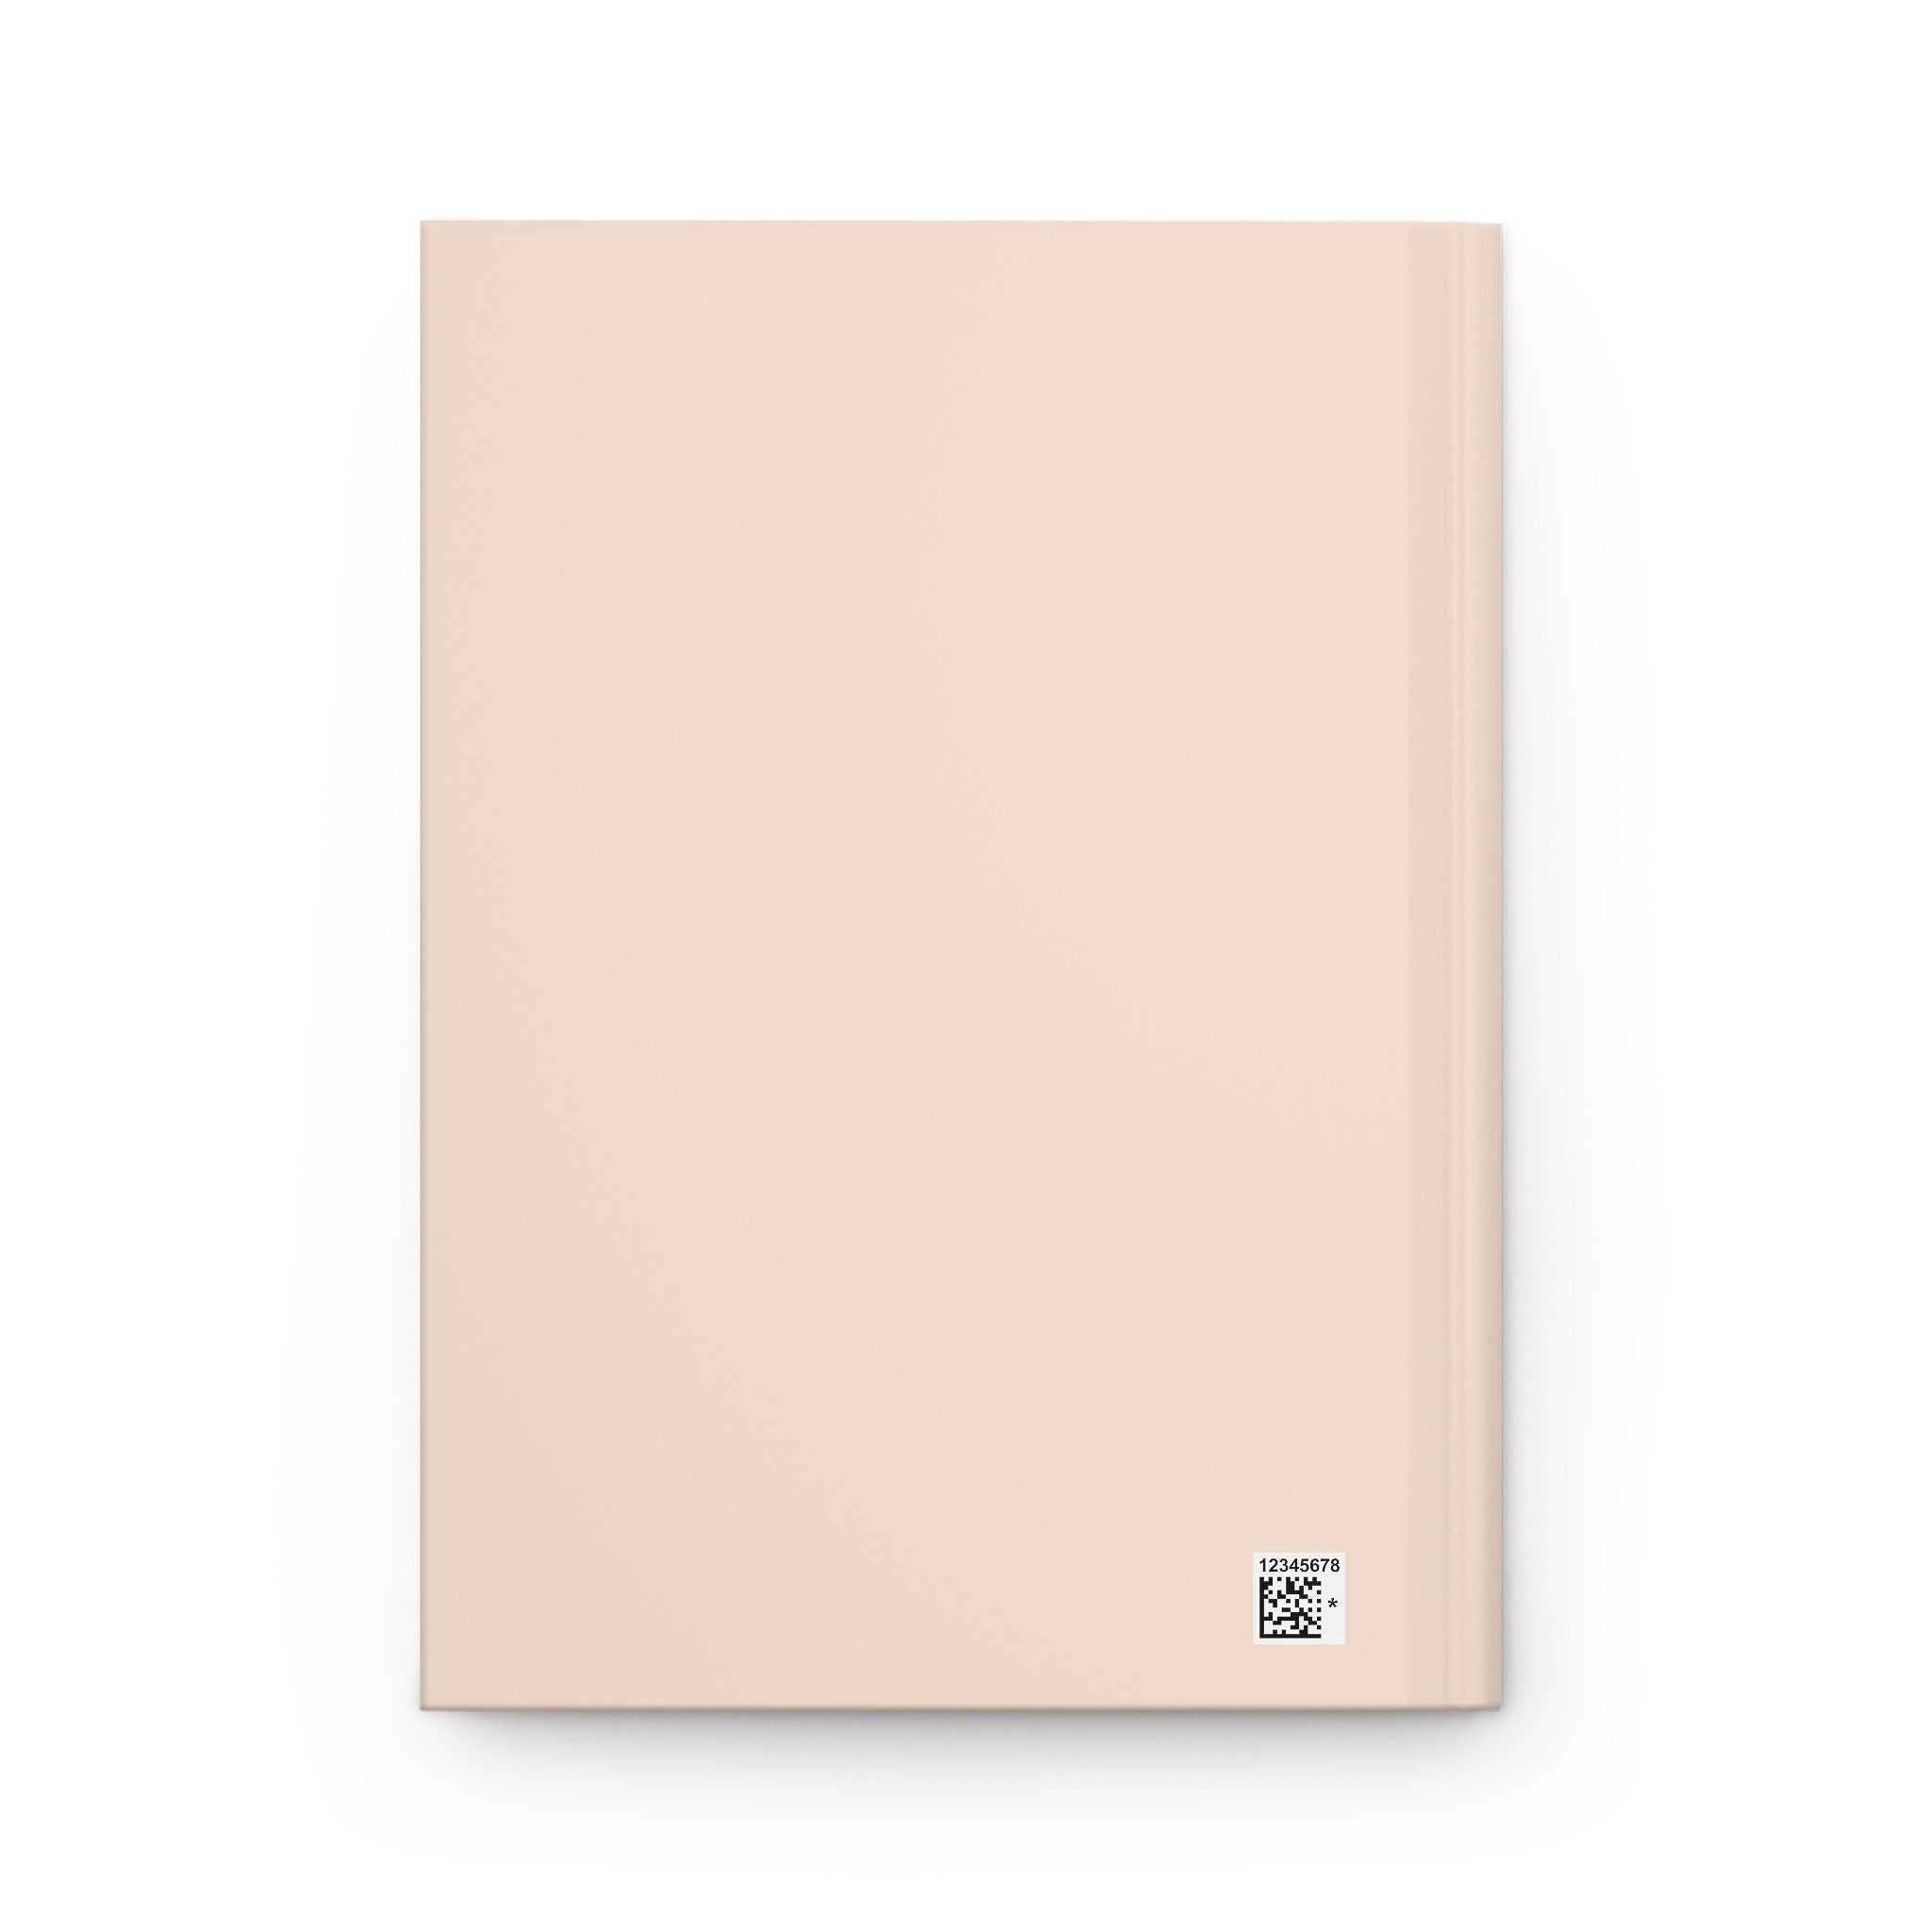 Coquette Journal: Journal for the Coquette aesthetic